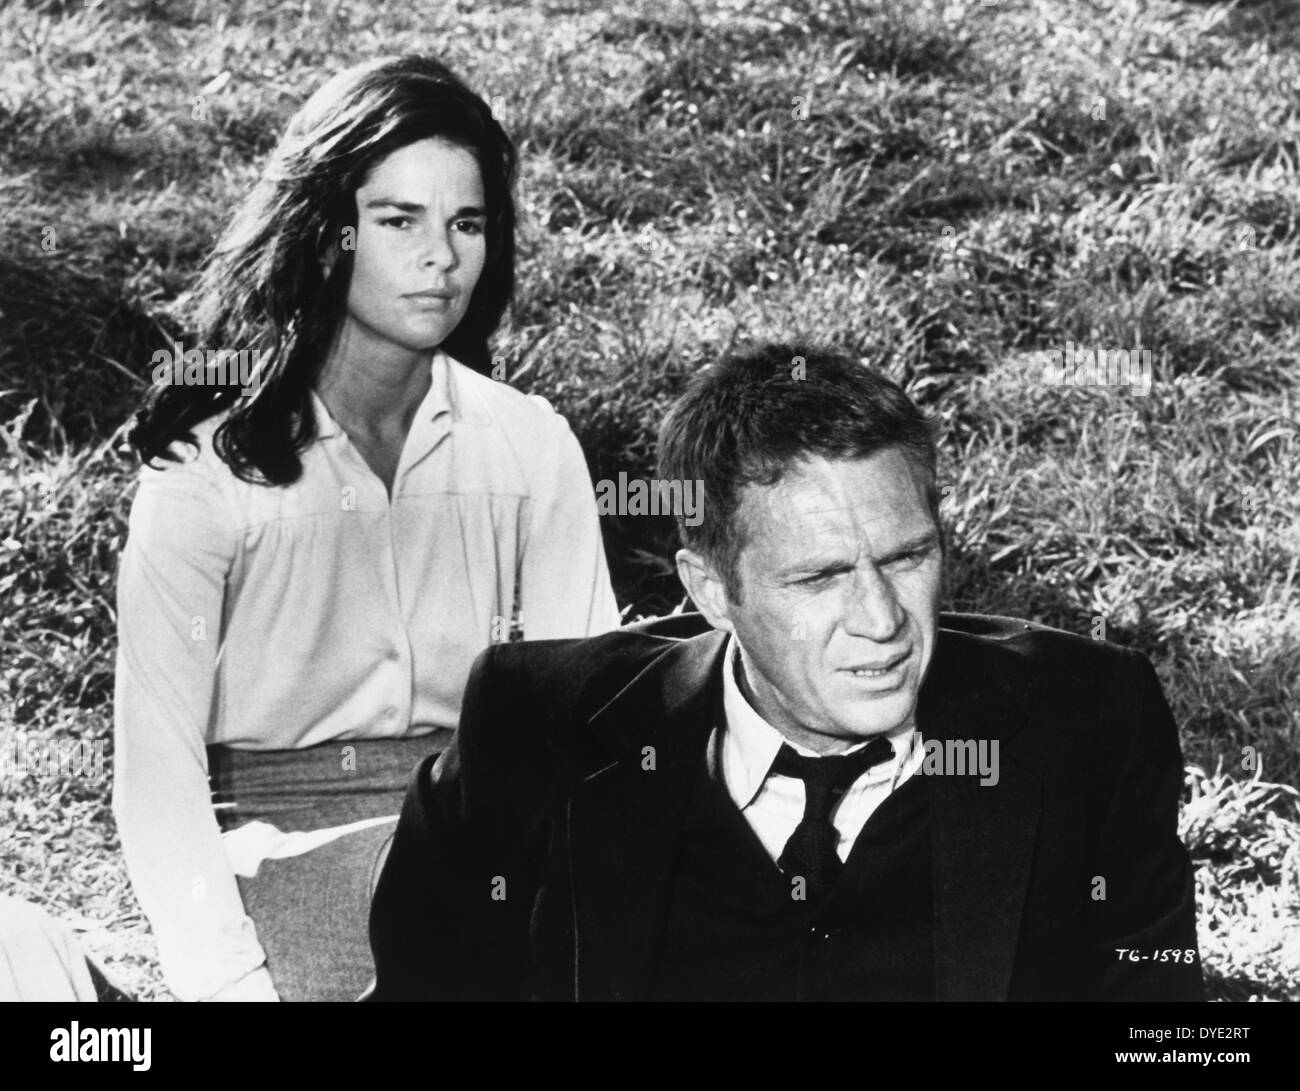 Ali MacGraw and Steve McQueen, on-set of the Film, 'The Getaway', 1972 Stock Photo